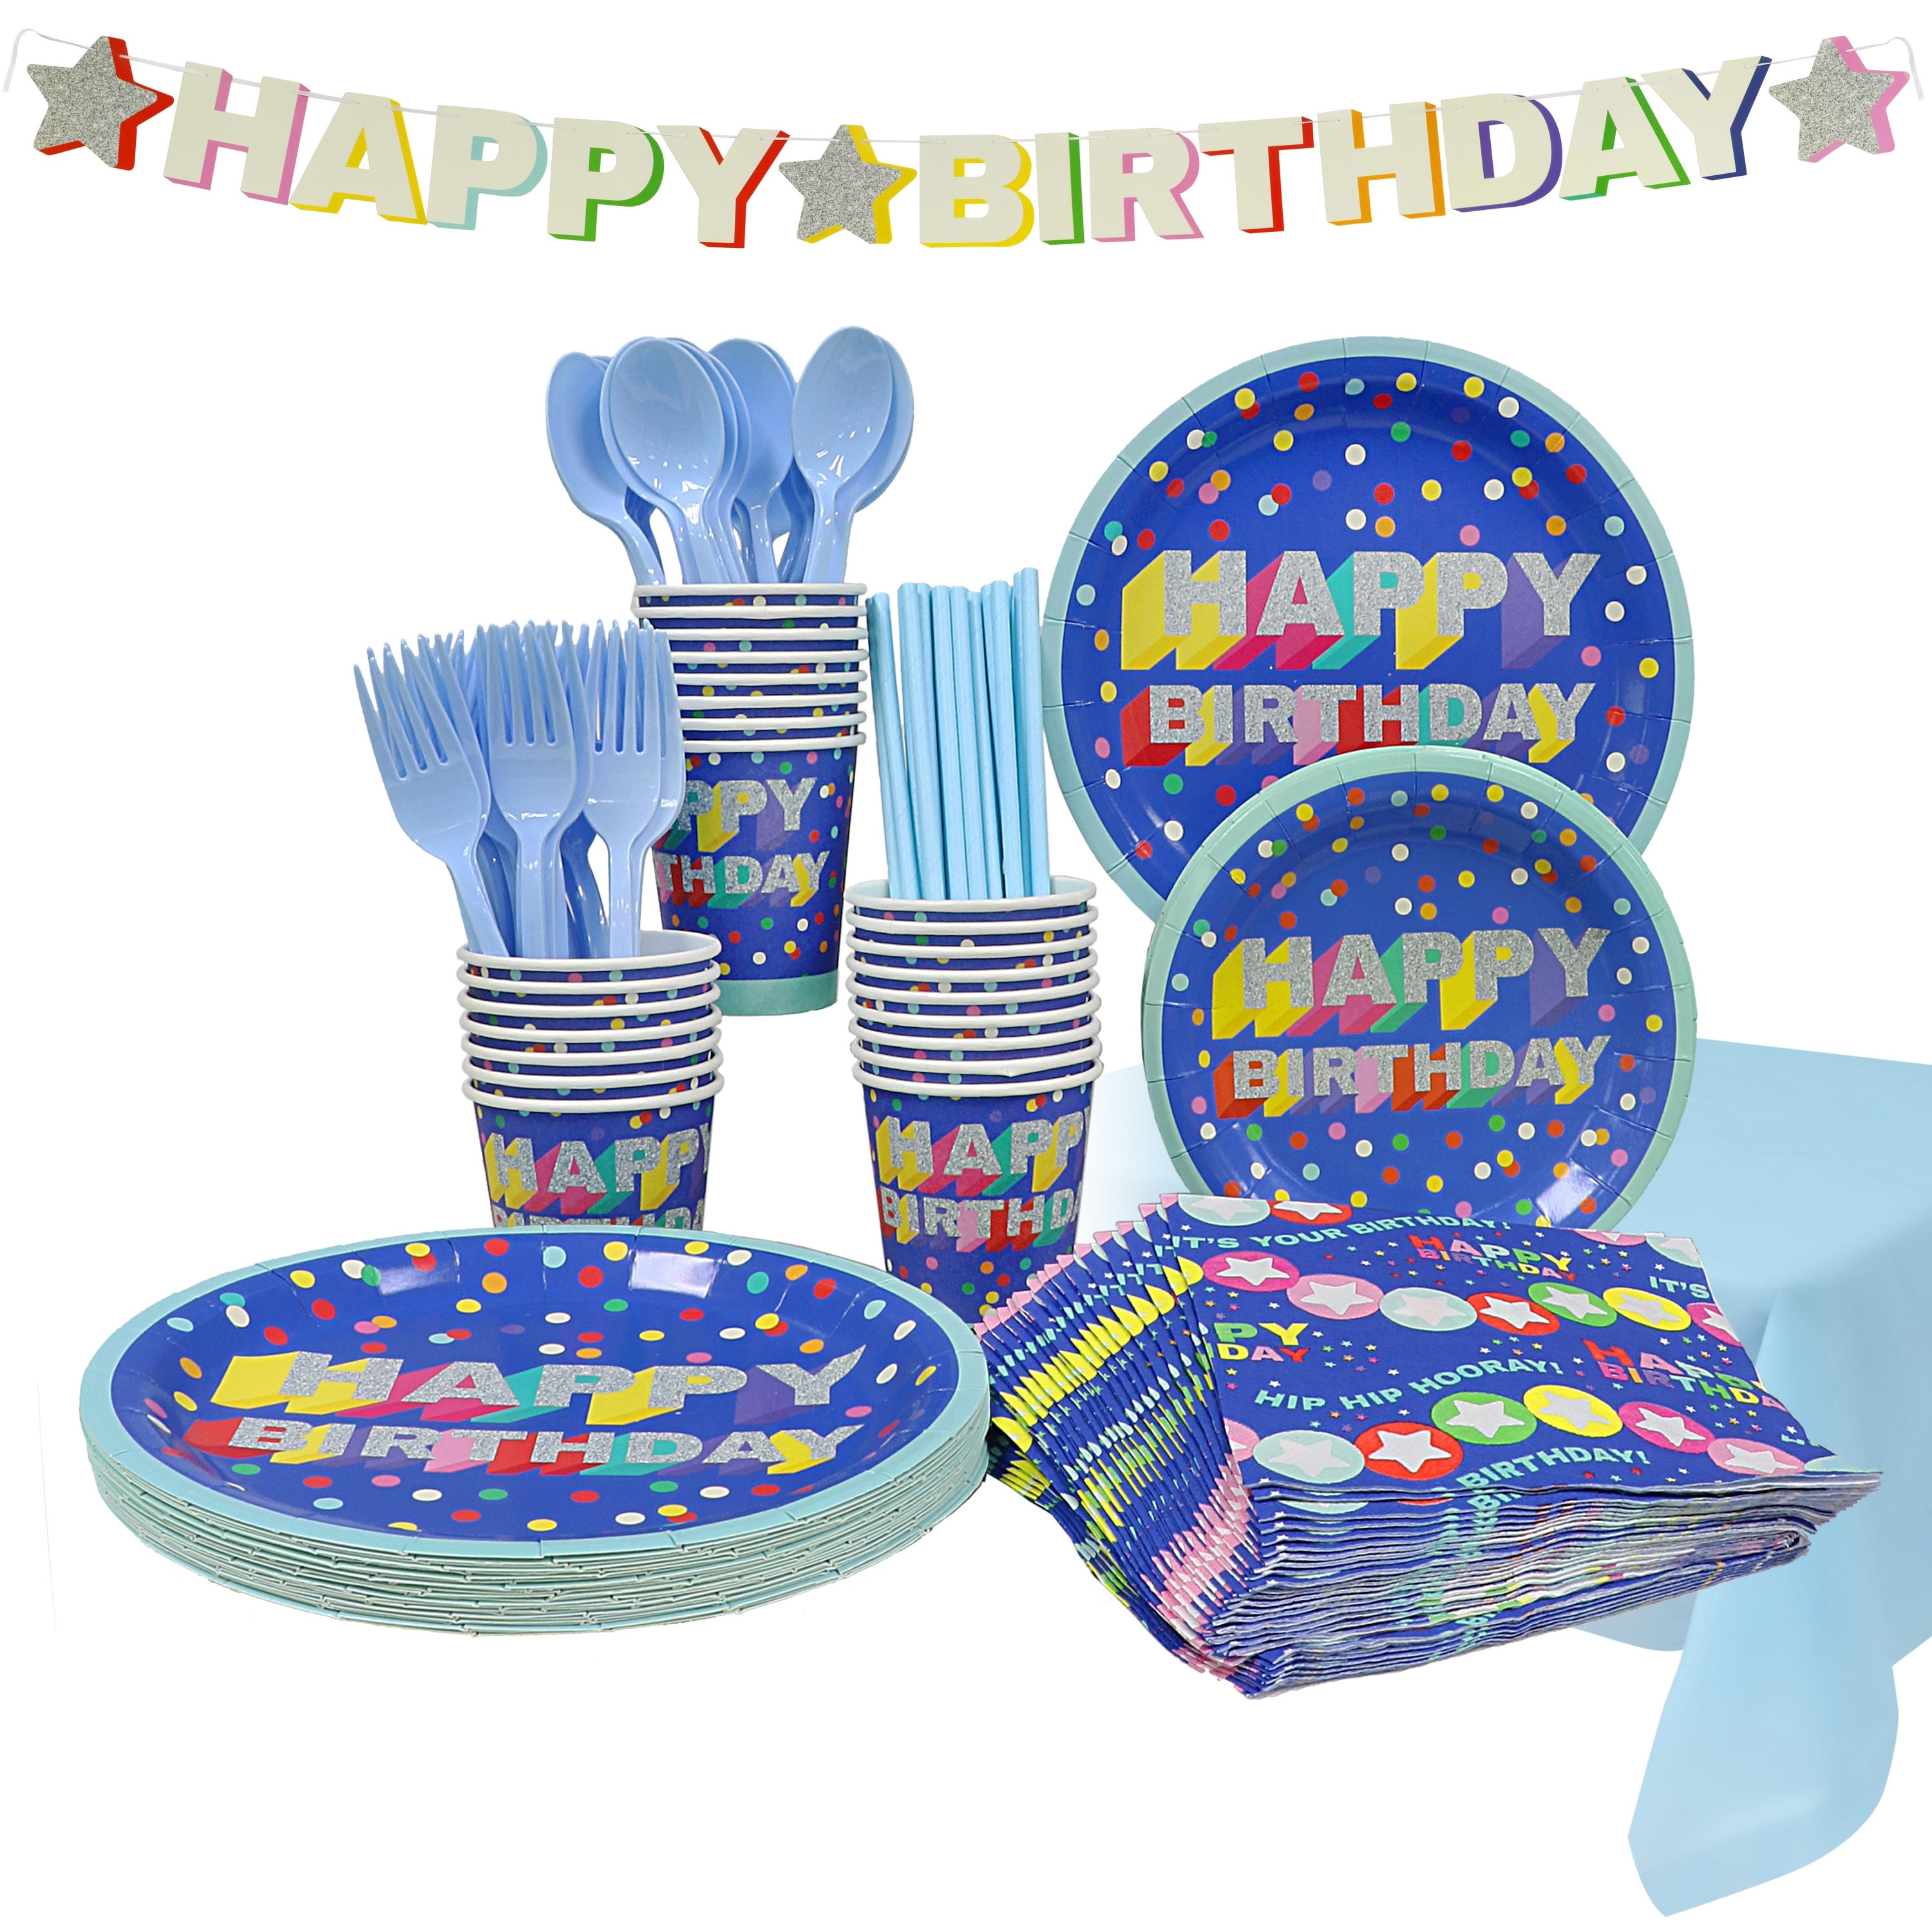 https://ak1.ostkcdn.com/images/products/is/images/direct/e70c3c2ba391fbe5052c553aaafe4882f913b798/Puleo-171-PC.-Disposable-Birthday-Set%2C-Serves-24-with-Small-and-Large-Plates%2C-Napkins%2C-Cups%2C-Utensils%2C-Straws%2C-Tablecloth-Banner.jpg